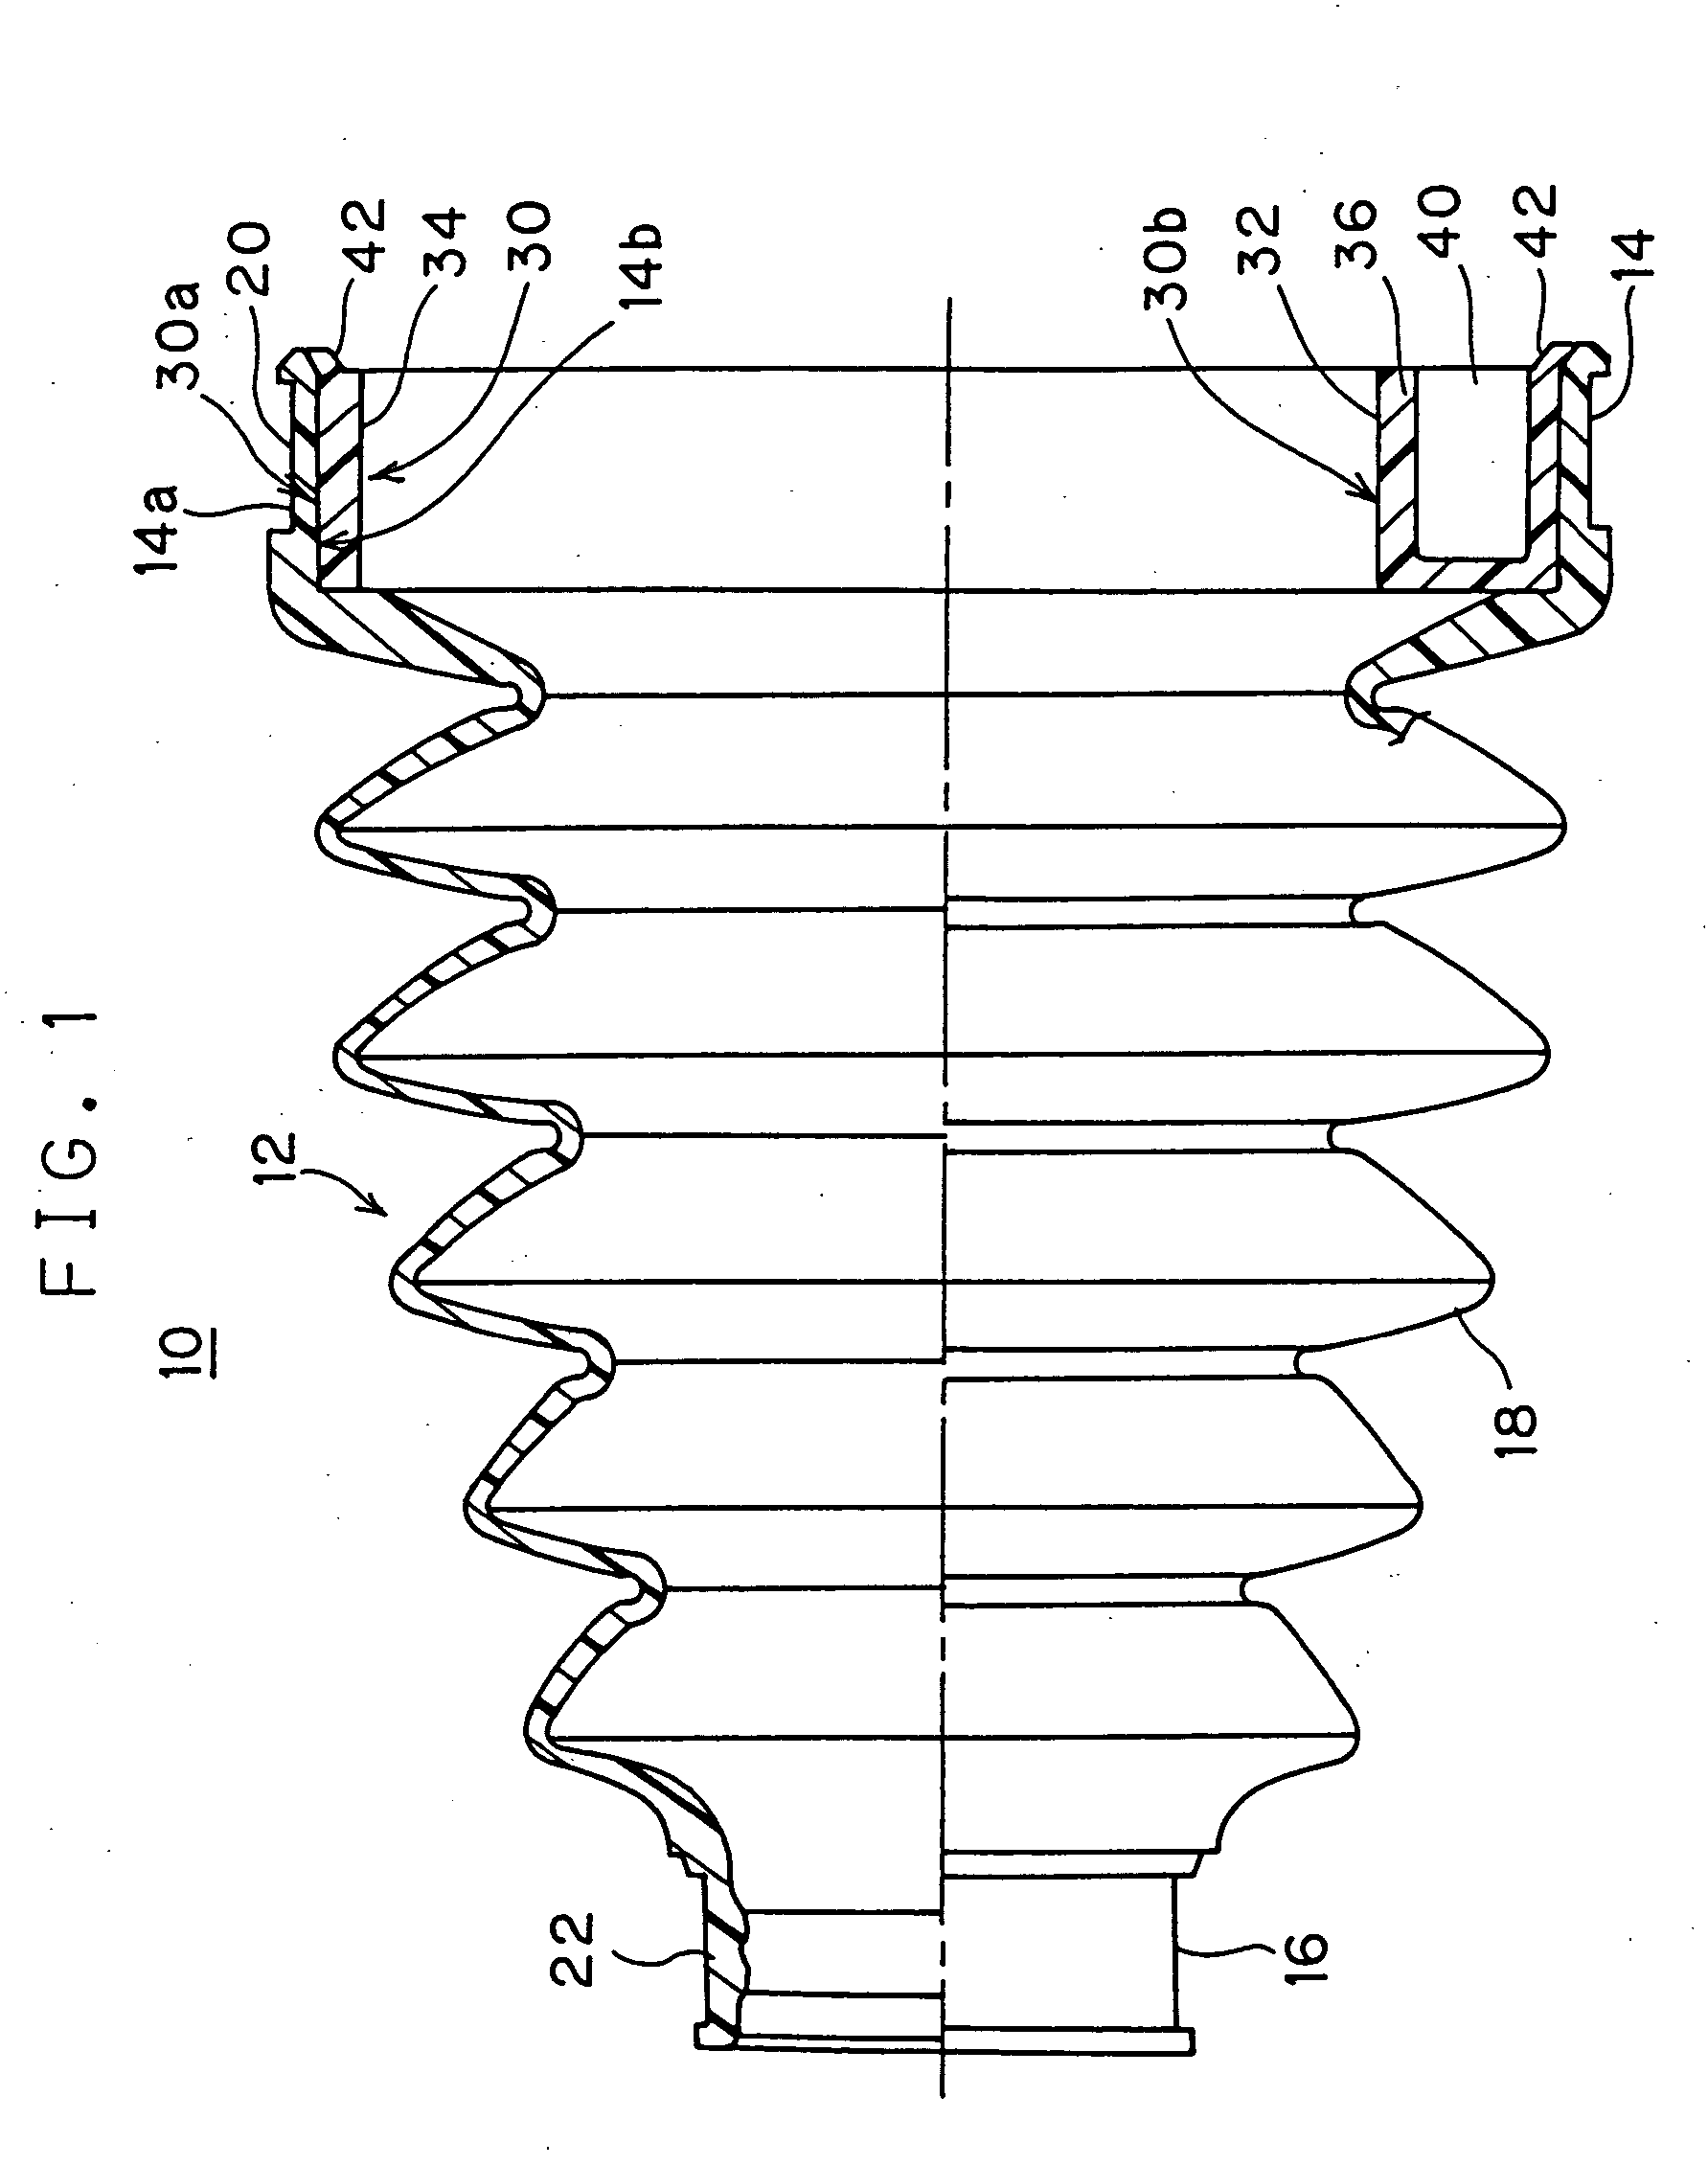 Method of producing resin joint boot